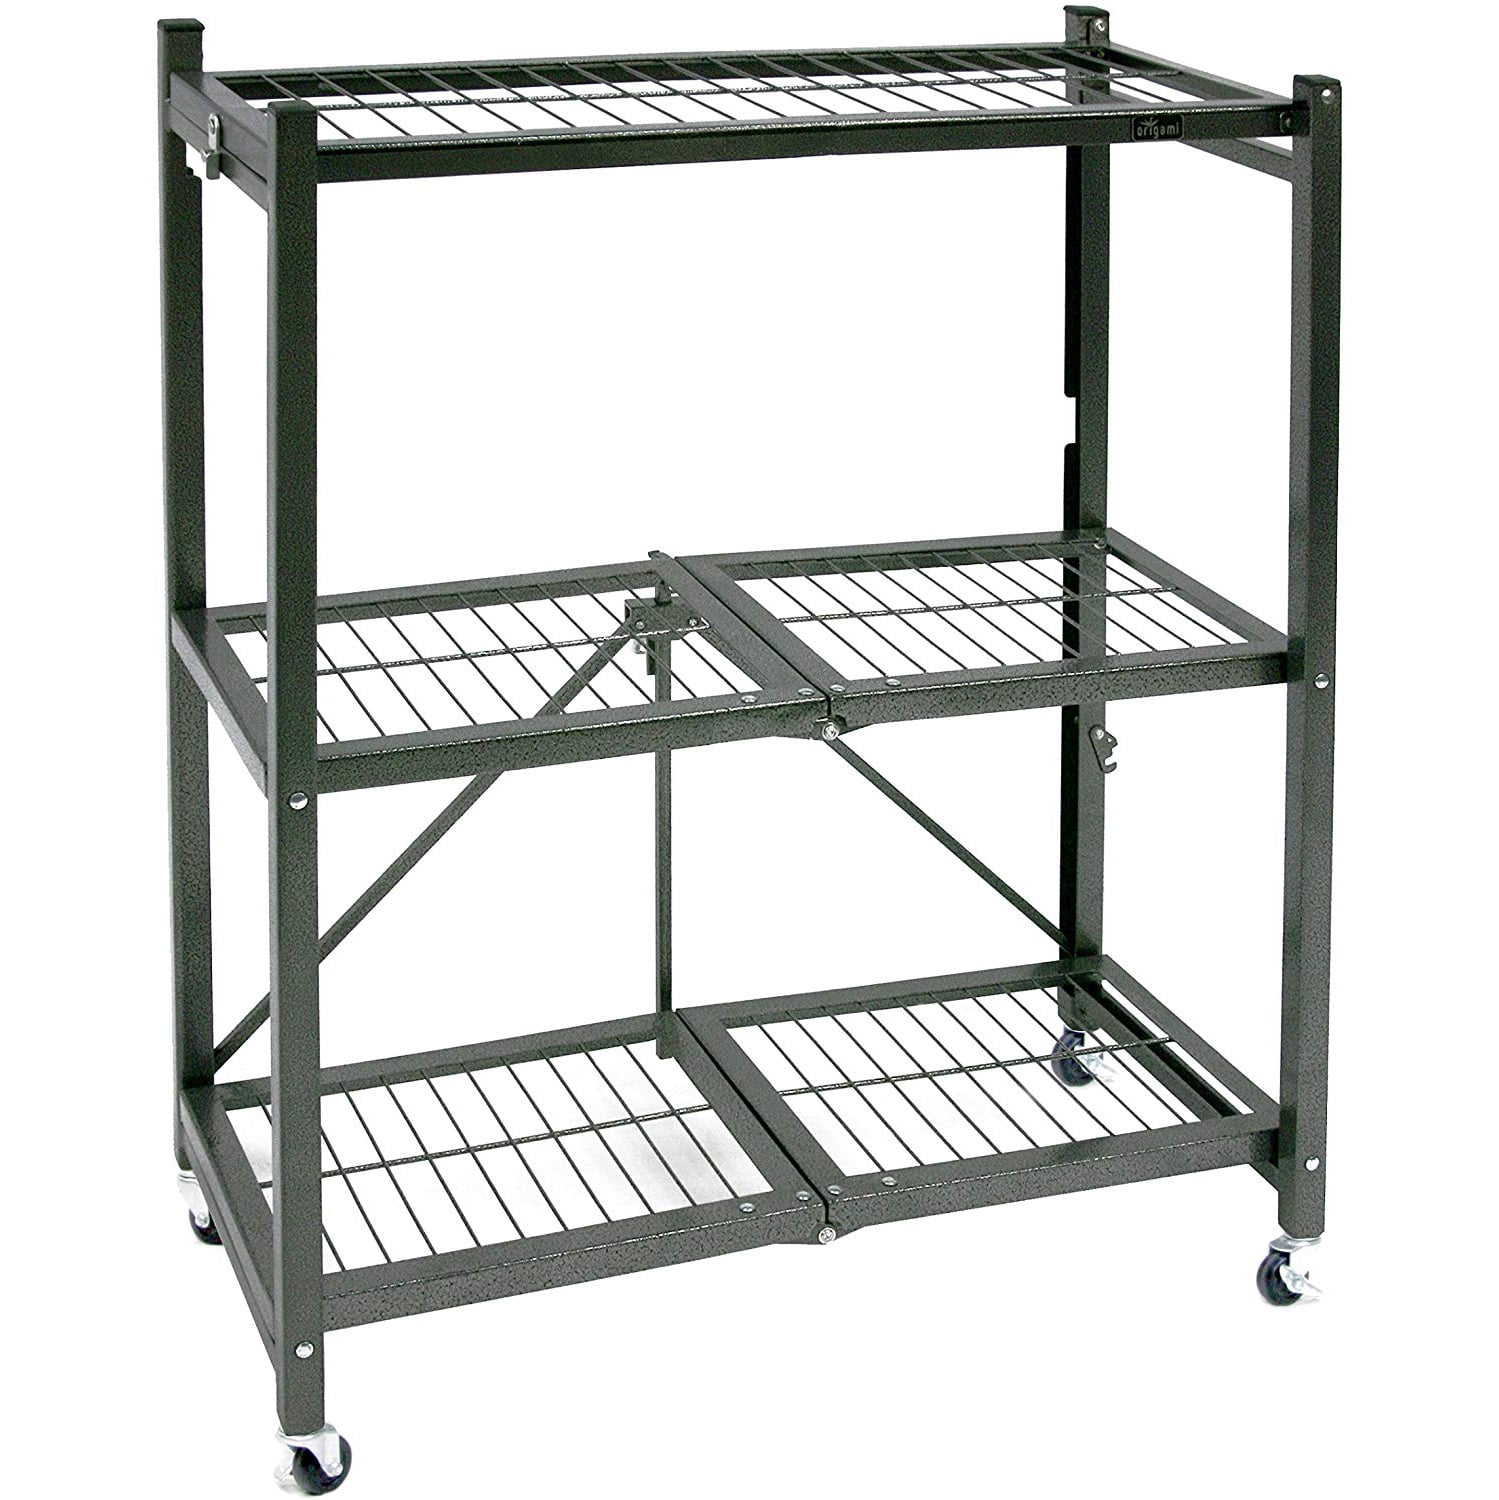 Origami Rack 3 Tier Foldable Storage Rolling Cart Metal Wire Organizer Shelves 